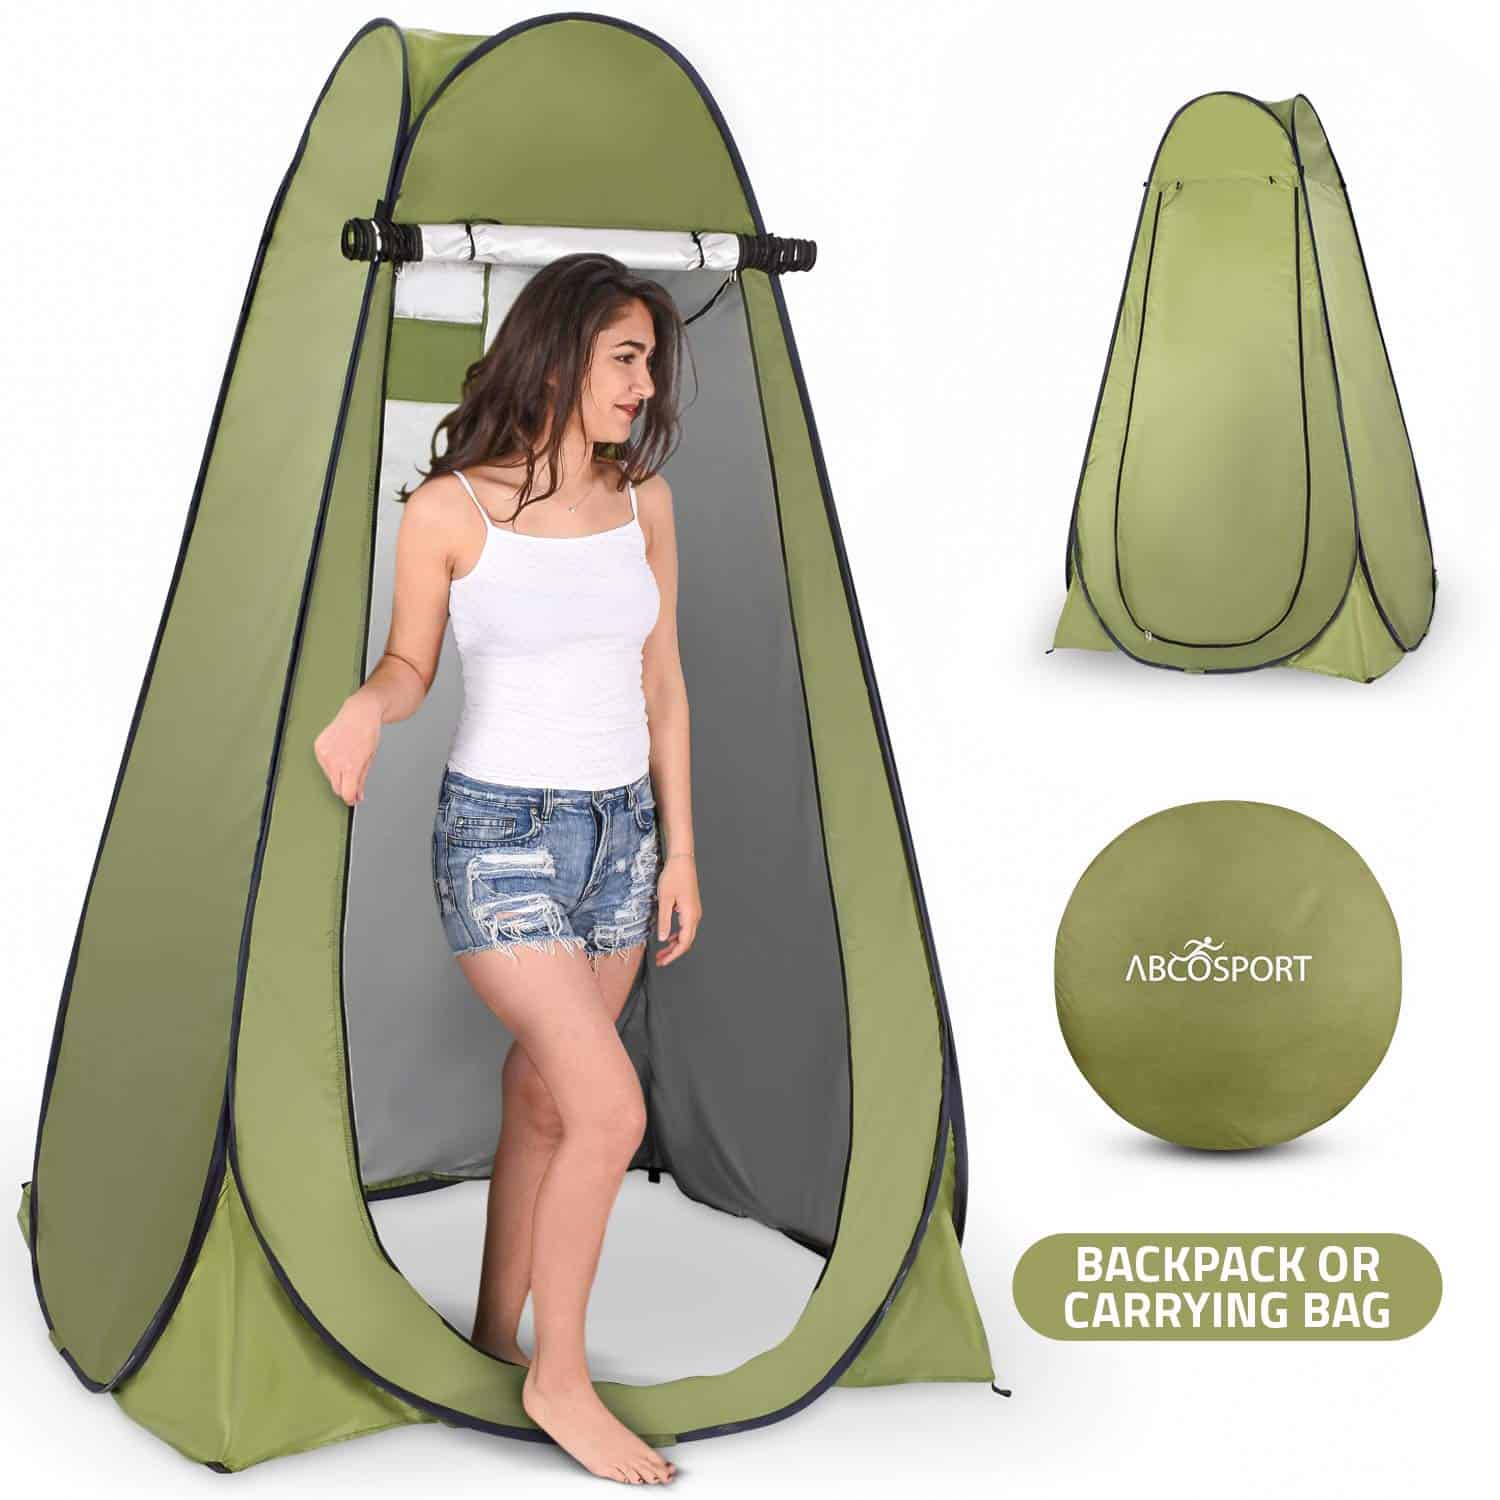 Pop up privacy tent